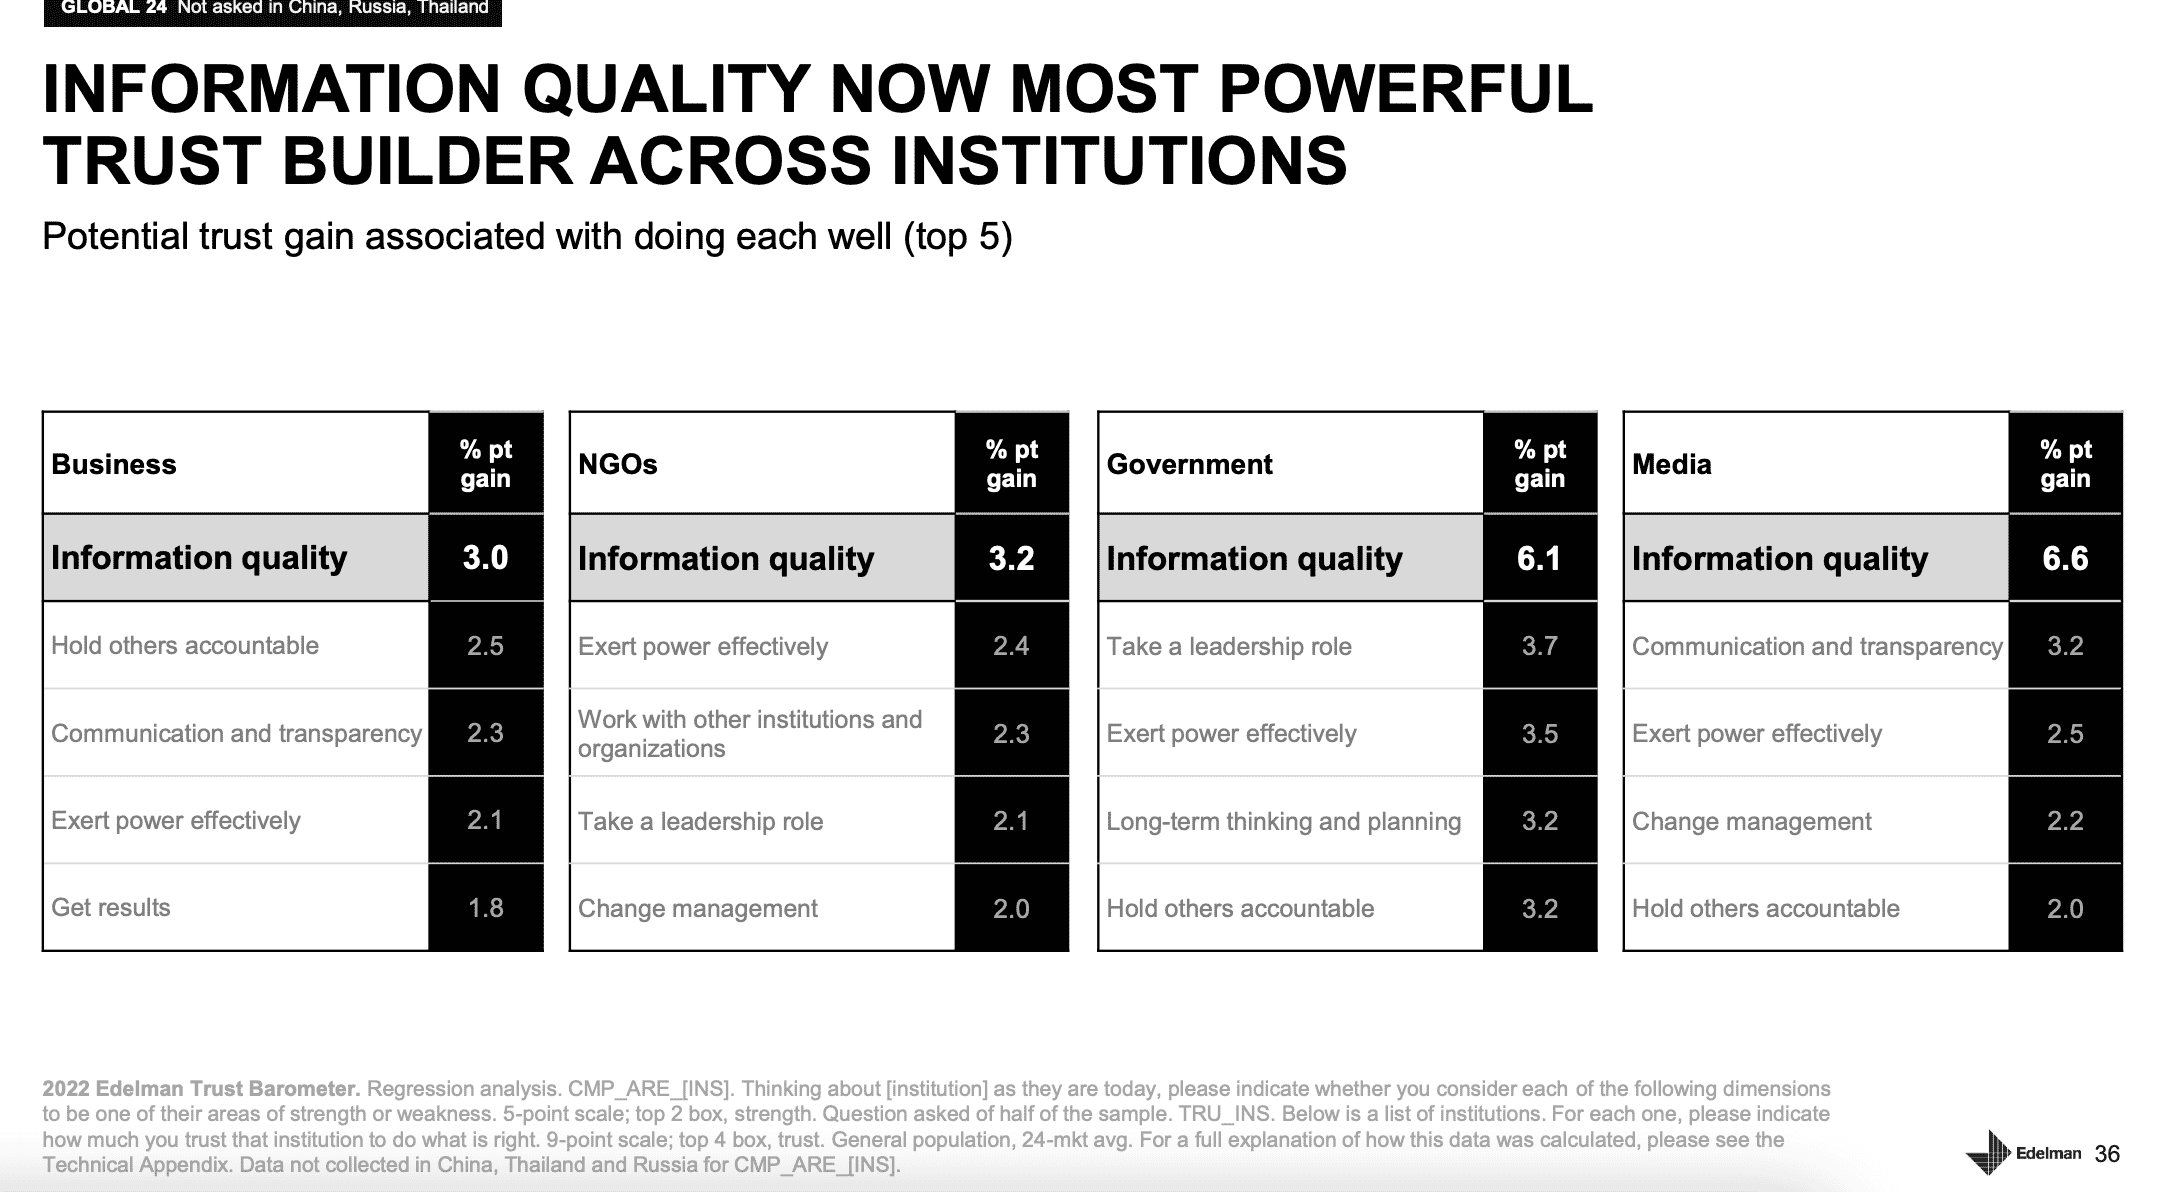 chart showing information quality